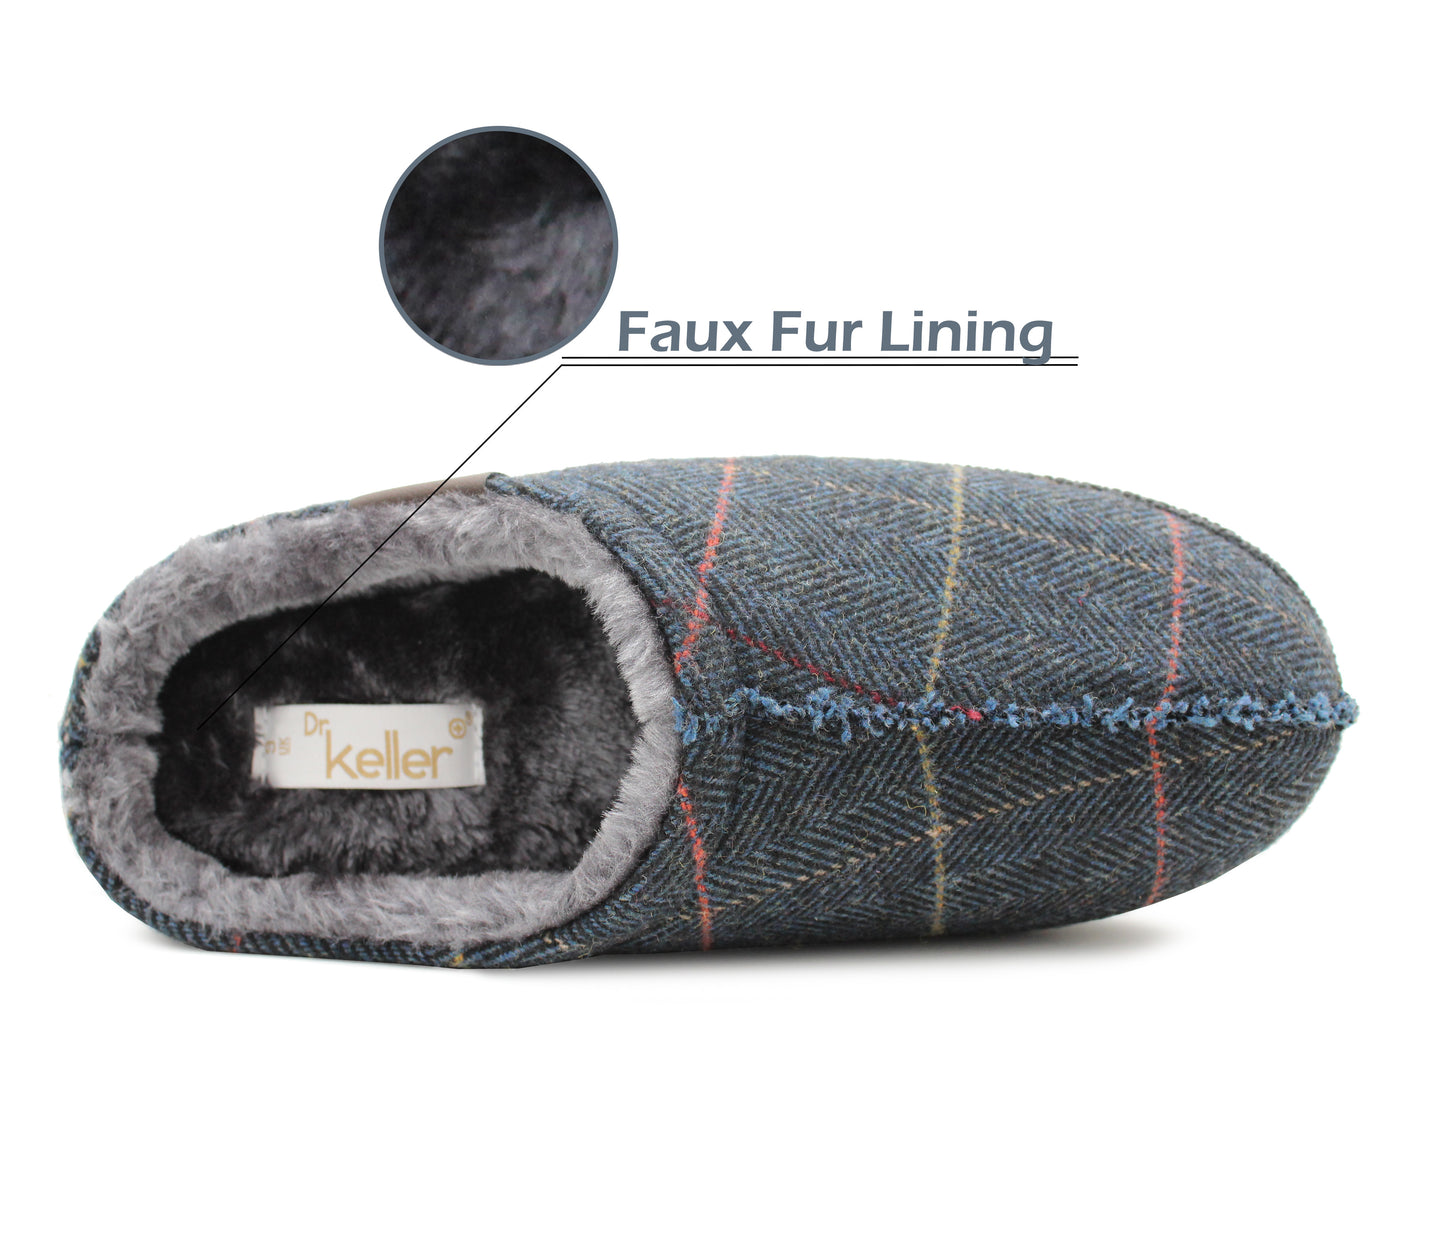 Mens Slip On Faux Fur Lined Mules Backless Lightweight Indoor House Navy Slippers